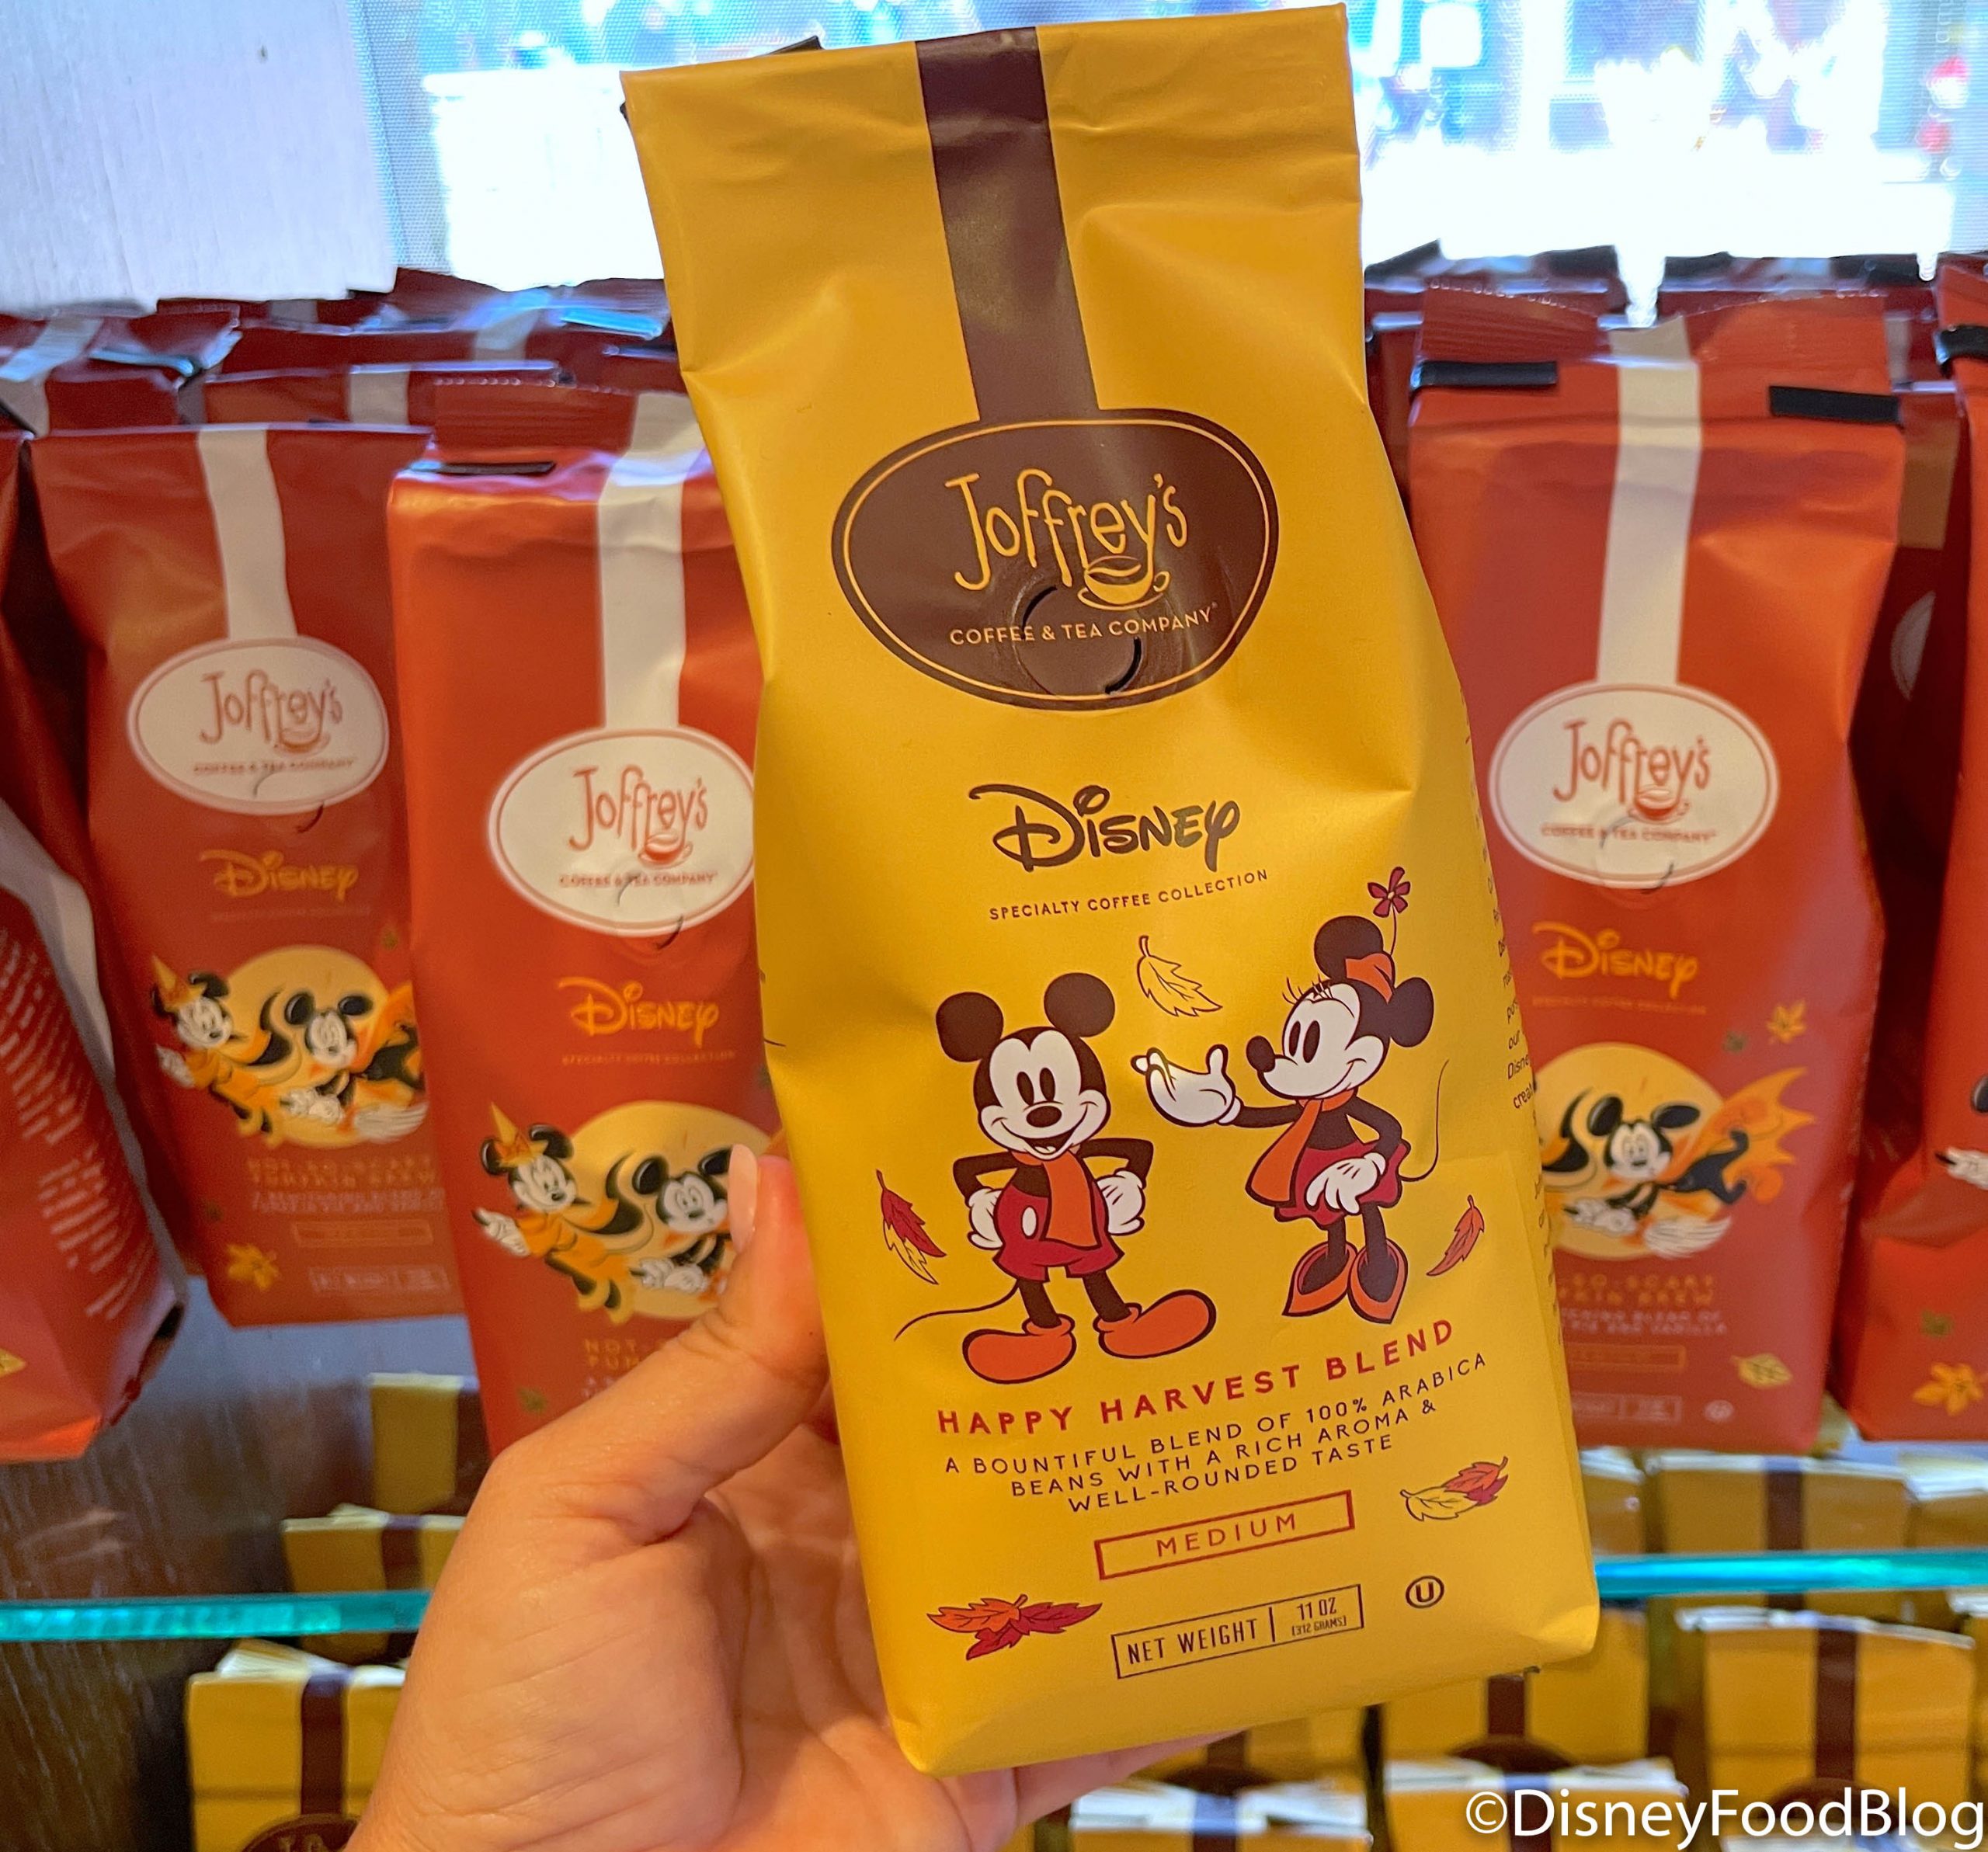 https://www.disneyfoodblog.com/wp-content/uploads/2021/09/2021-reopening-wdw-disney-springs-joffreys-coffee-fall-flavors-scaled.jpg